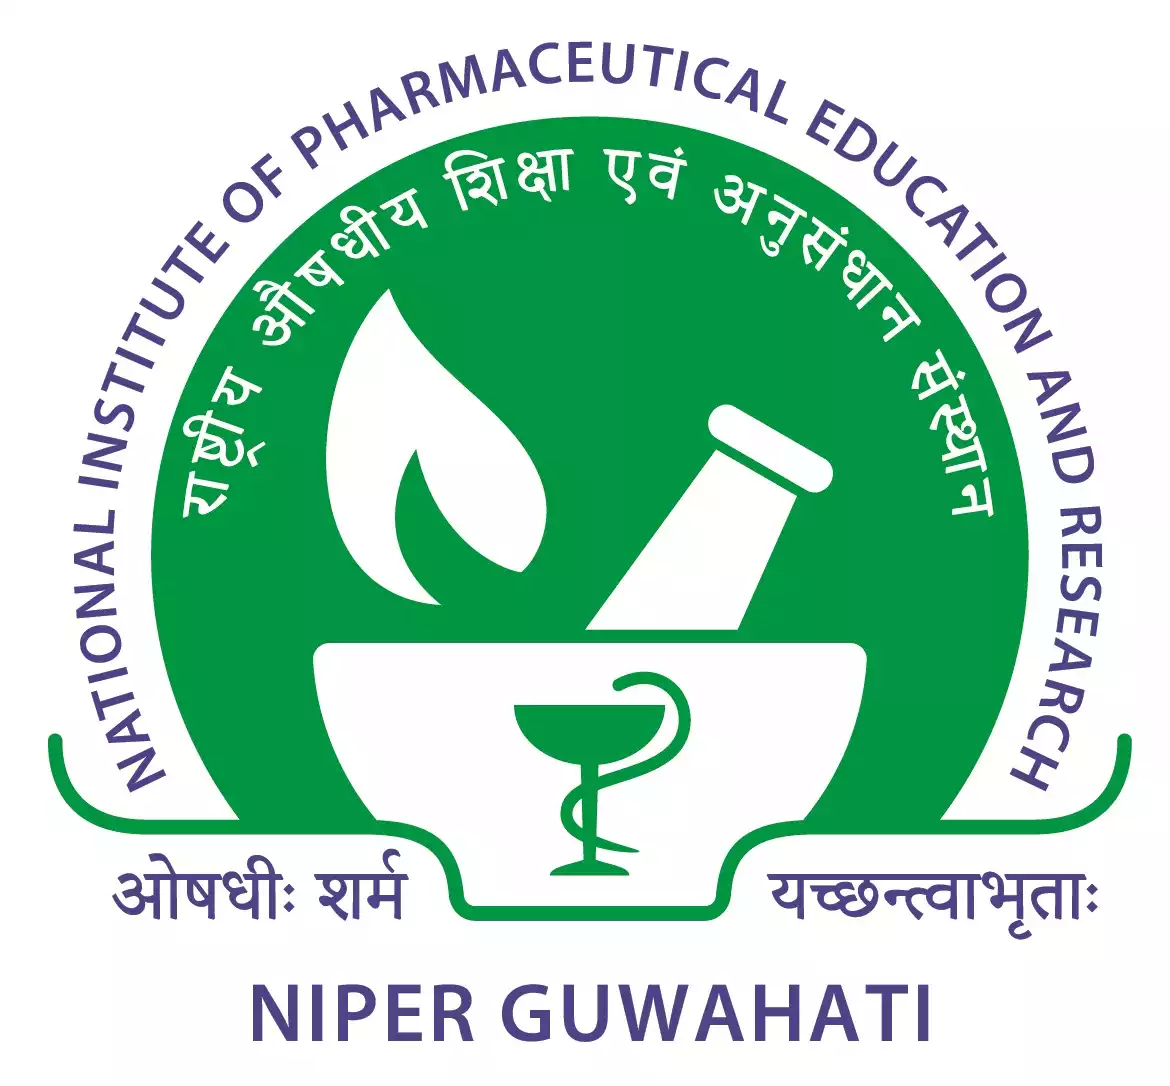 National Institute of Pharmaceutical Education and Research (NIPER), Guwahati